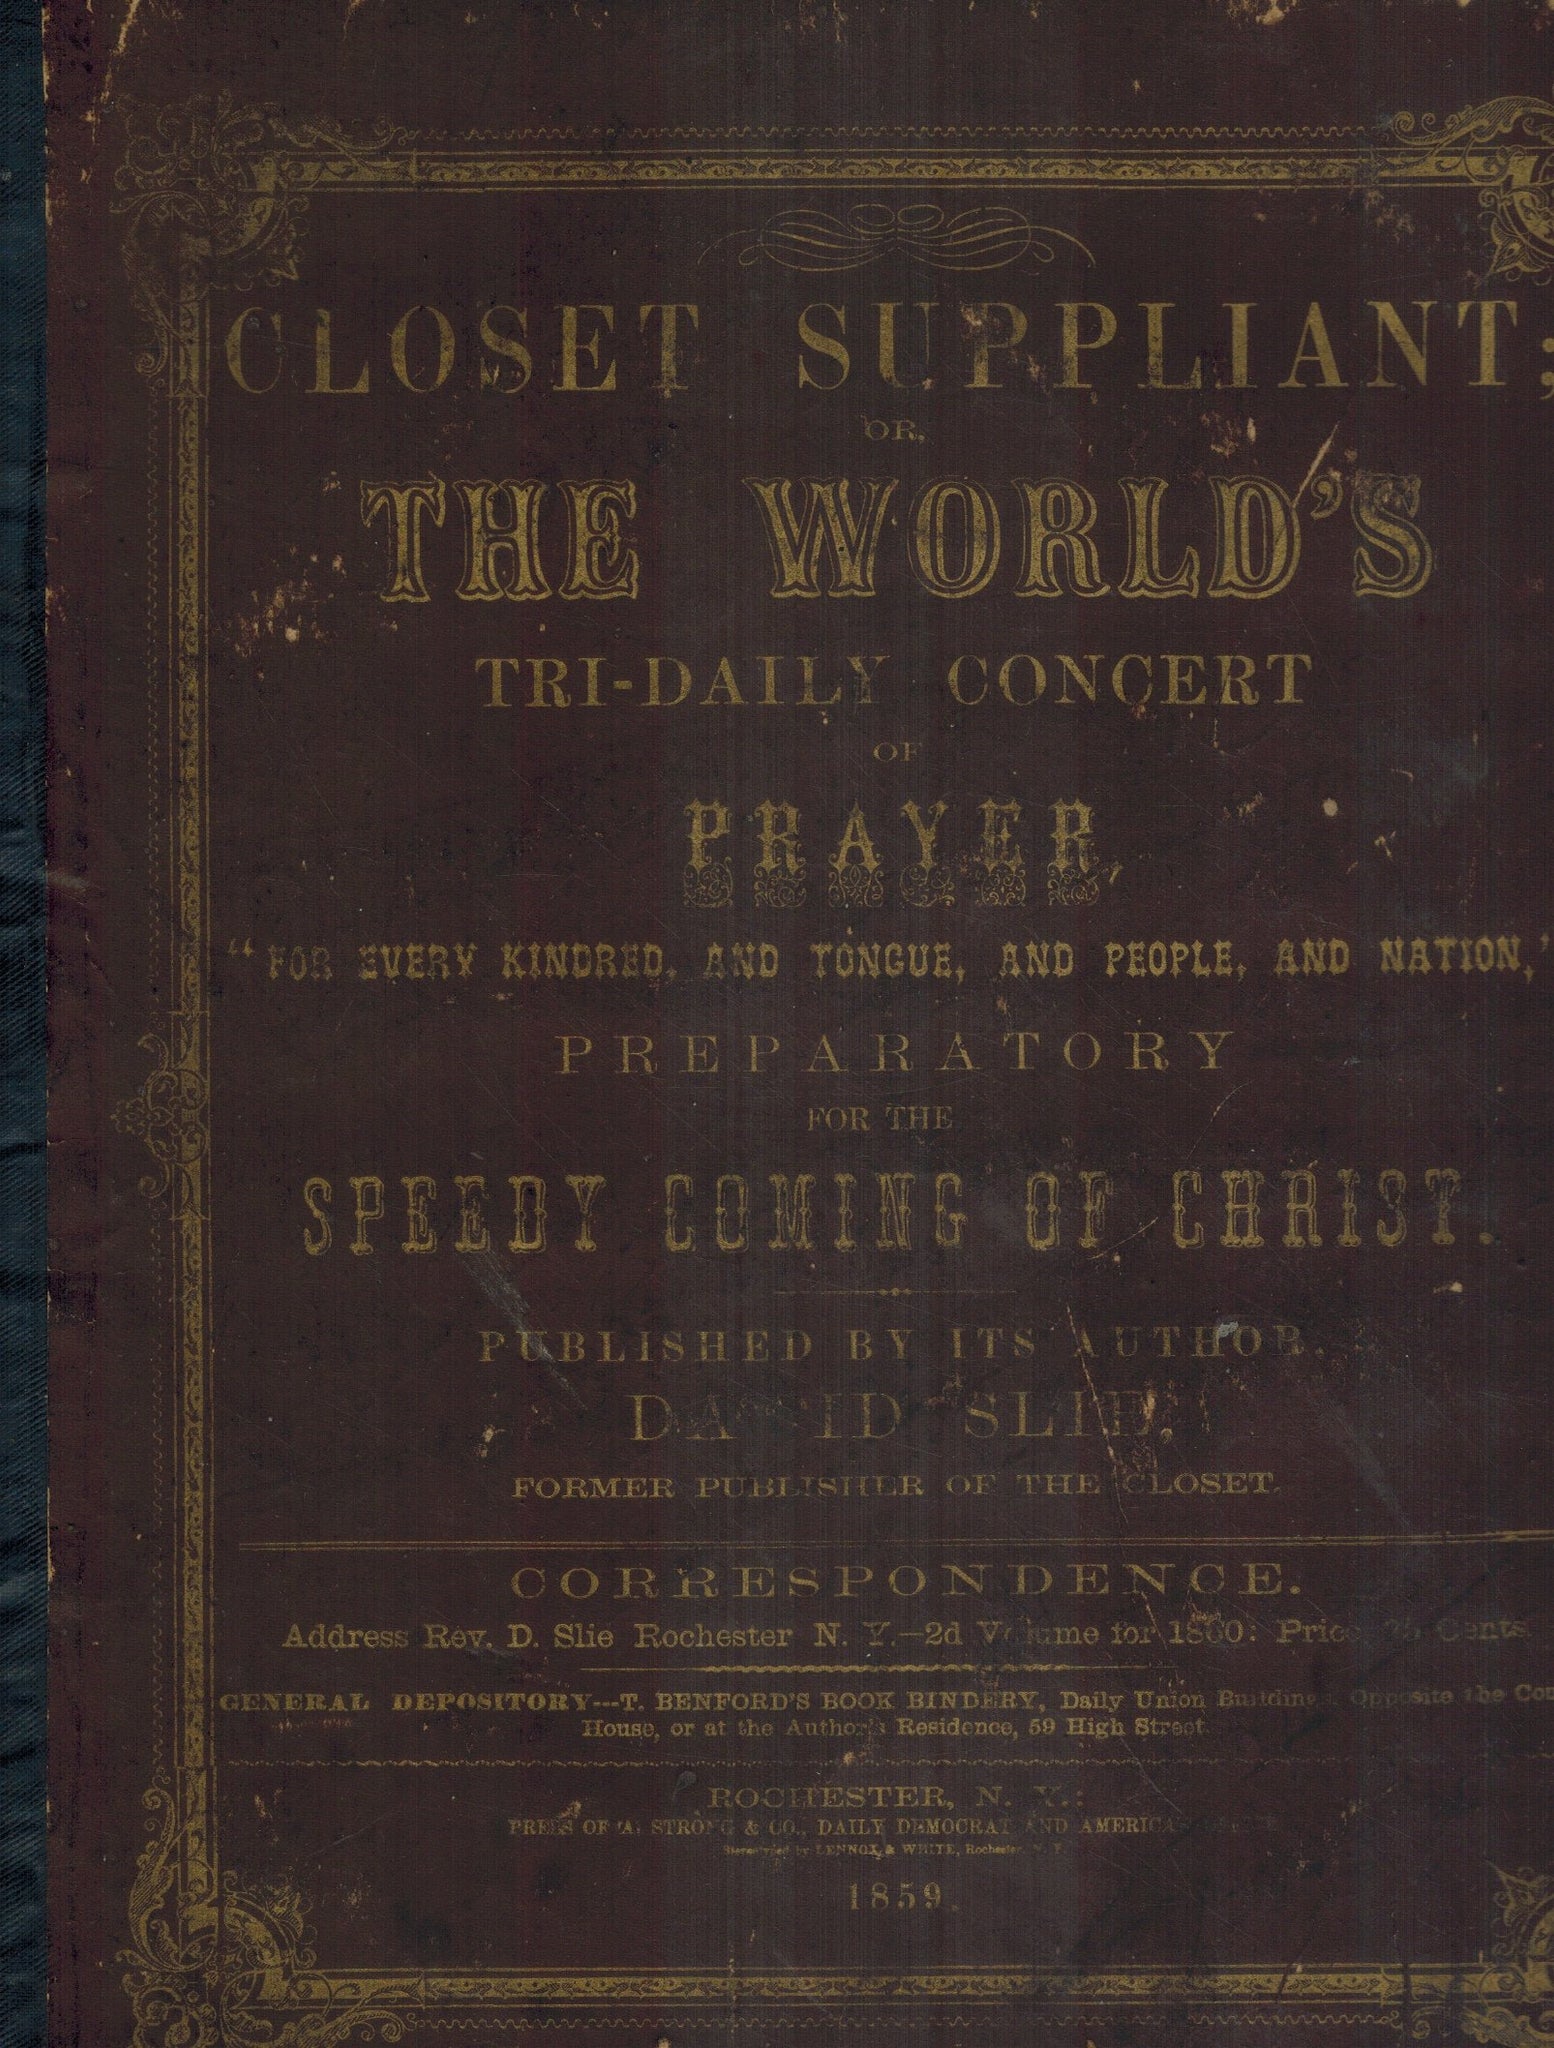 CLOSET SUPPLIANT; OR, THE WORLD'S TRI-DAILY CONCERT OF PRAYER, "FOR EVERY  KINDRED, AND TONGUE, AND PEOPLE, AND NATION," PREPARATORY FOR THE SPEEDY  COMING OF CHRIST  by Slie, David (Publisher)